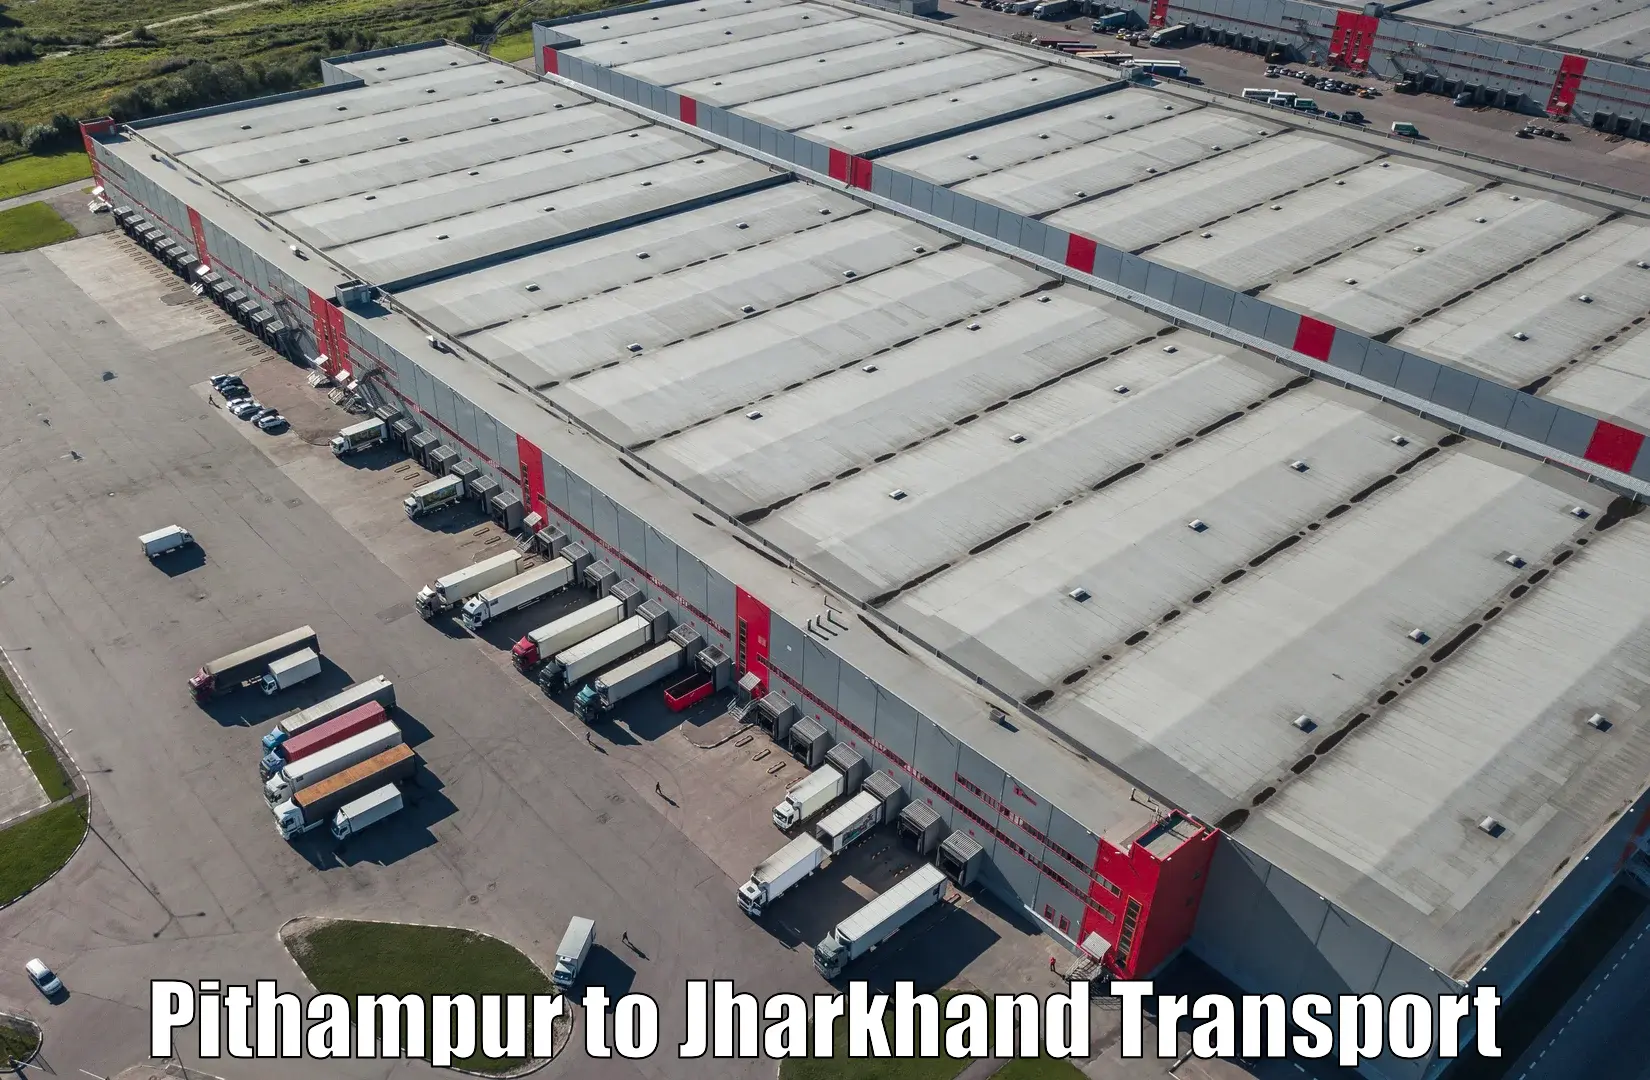 Air freight transport services in Pithampur to Bokaro Steel City